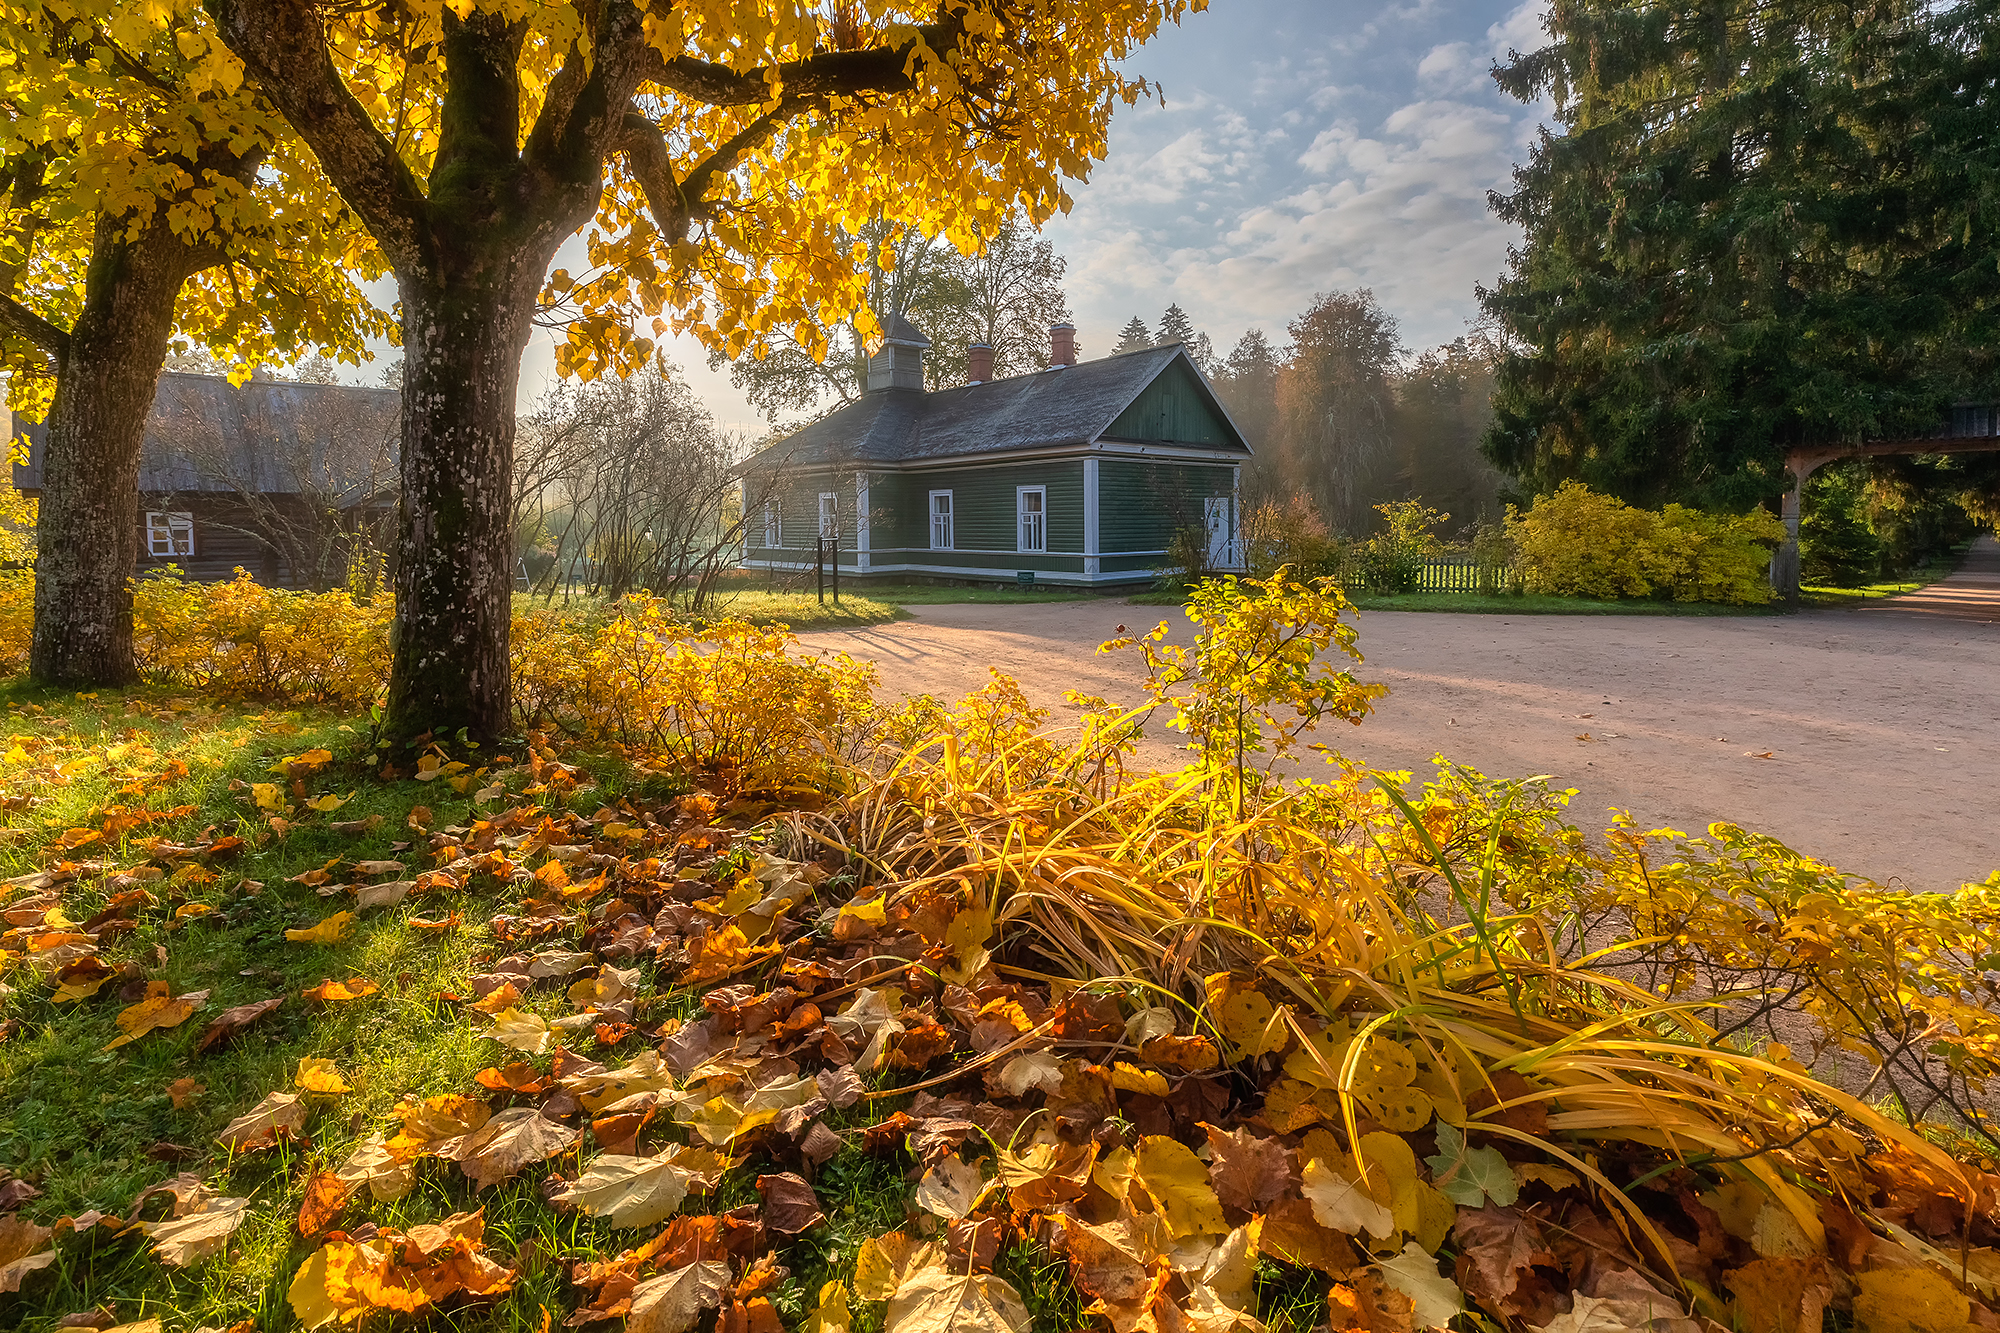 General 2000x1333 Alexander Pashenichev leaves road house trees outdoors warm photography clouds grass fall fallen leaves